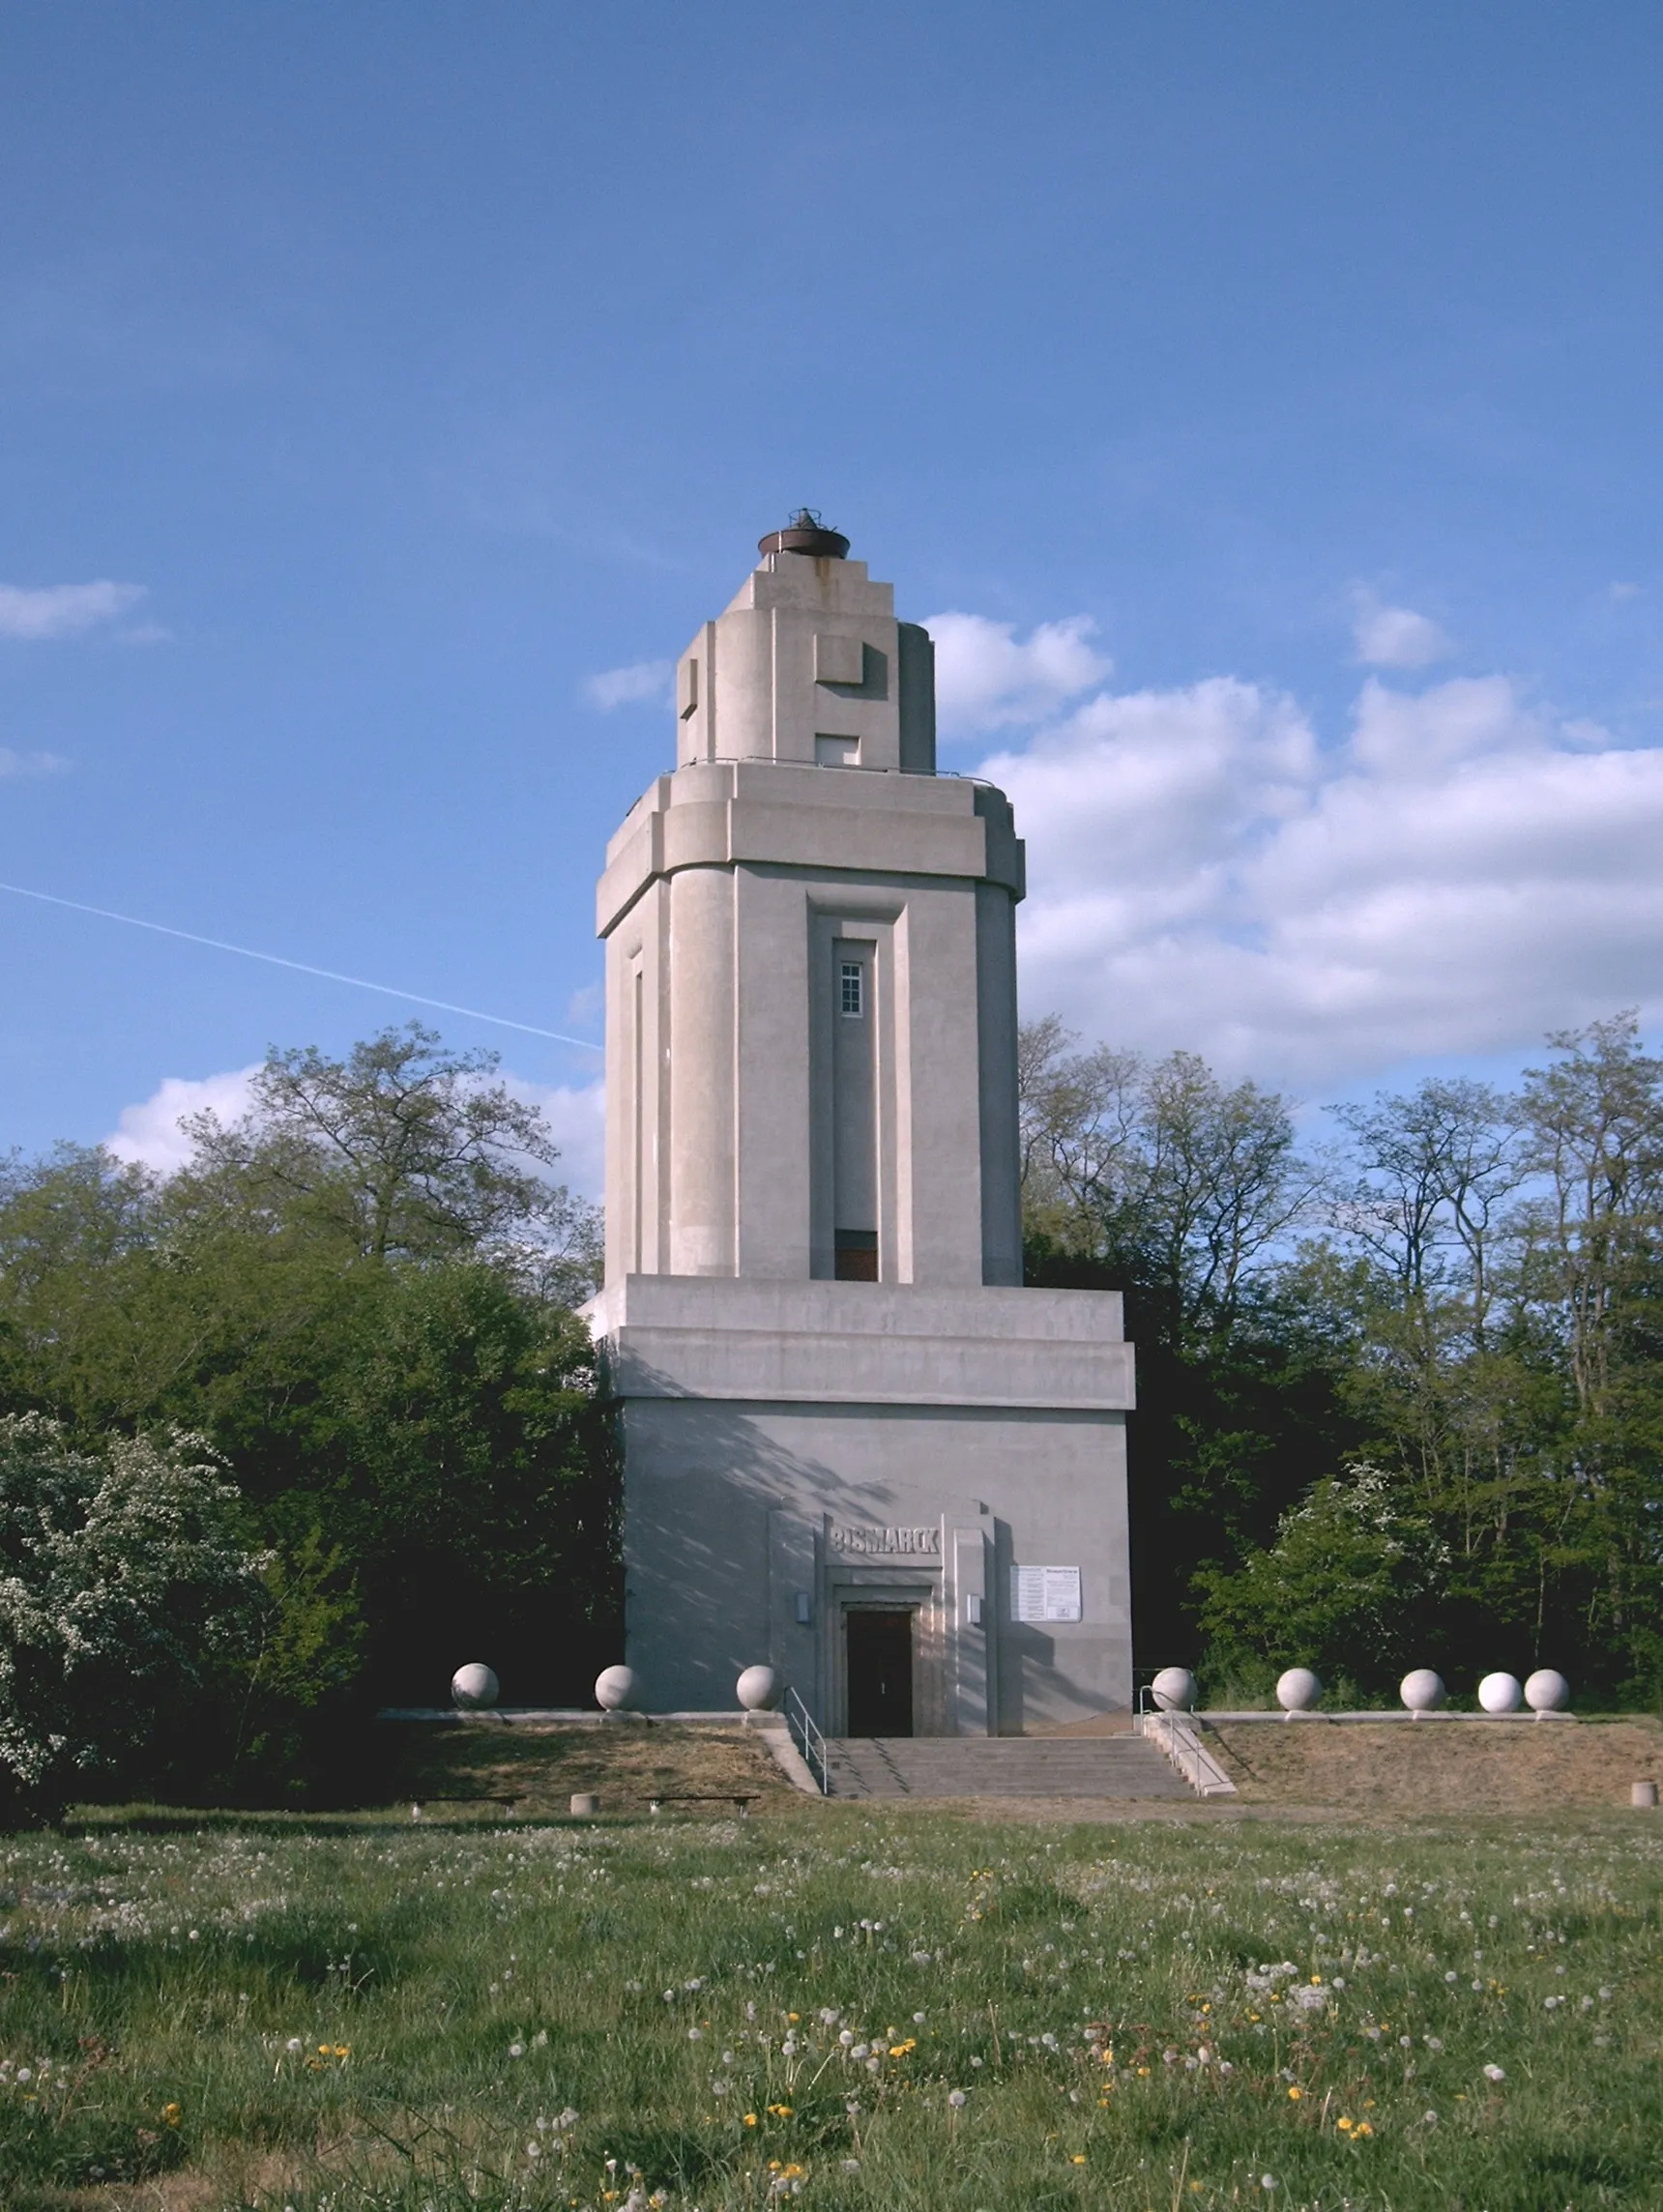 Photo showing: The Bismarck tower located in Lützschena-Stahmeln (quarter of Leipzig, Germany).